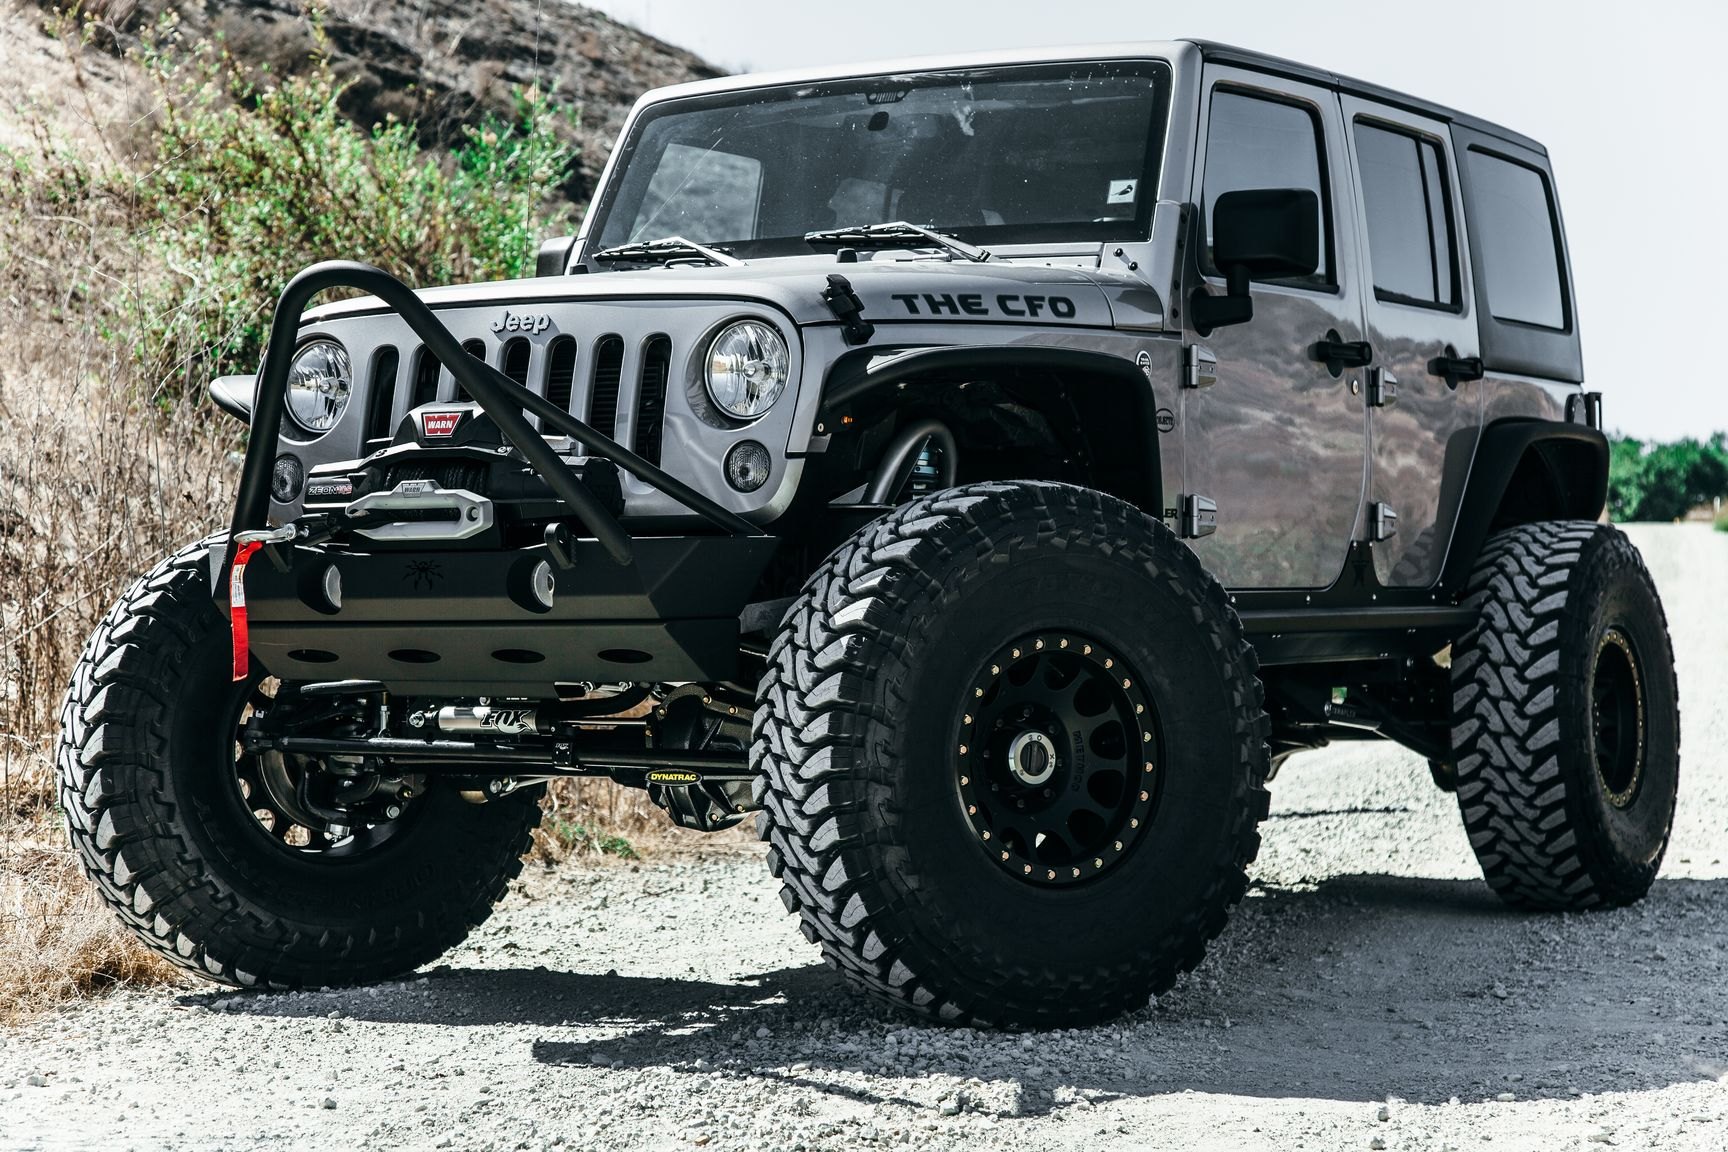 Gray Lifted Jeep Wrangler Fully Loaded with Off-Road Custom Accessories —   Gallery